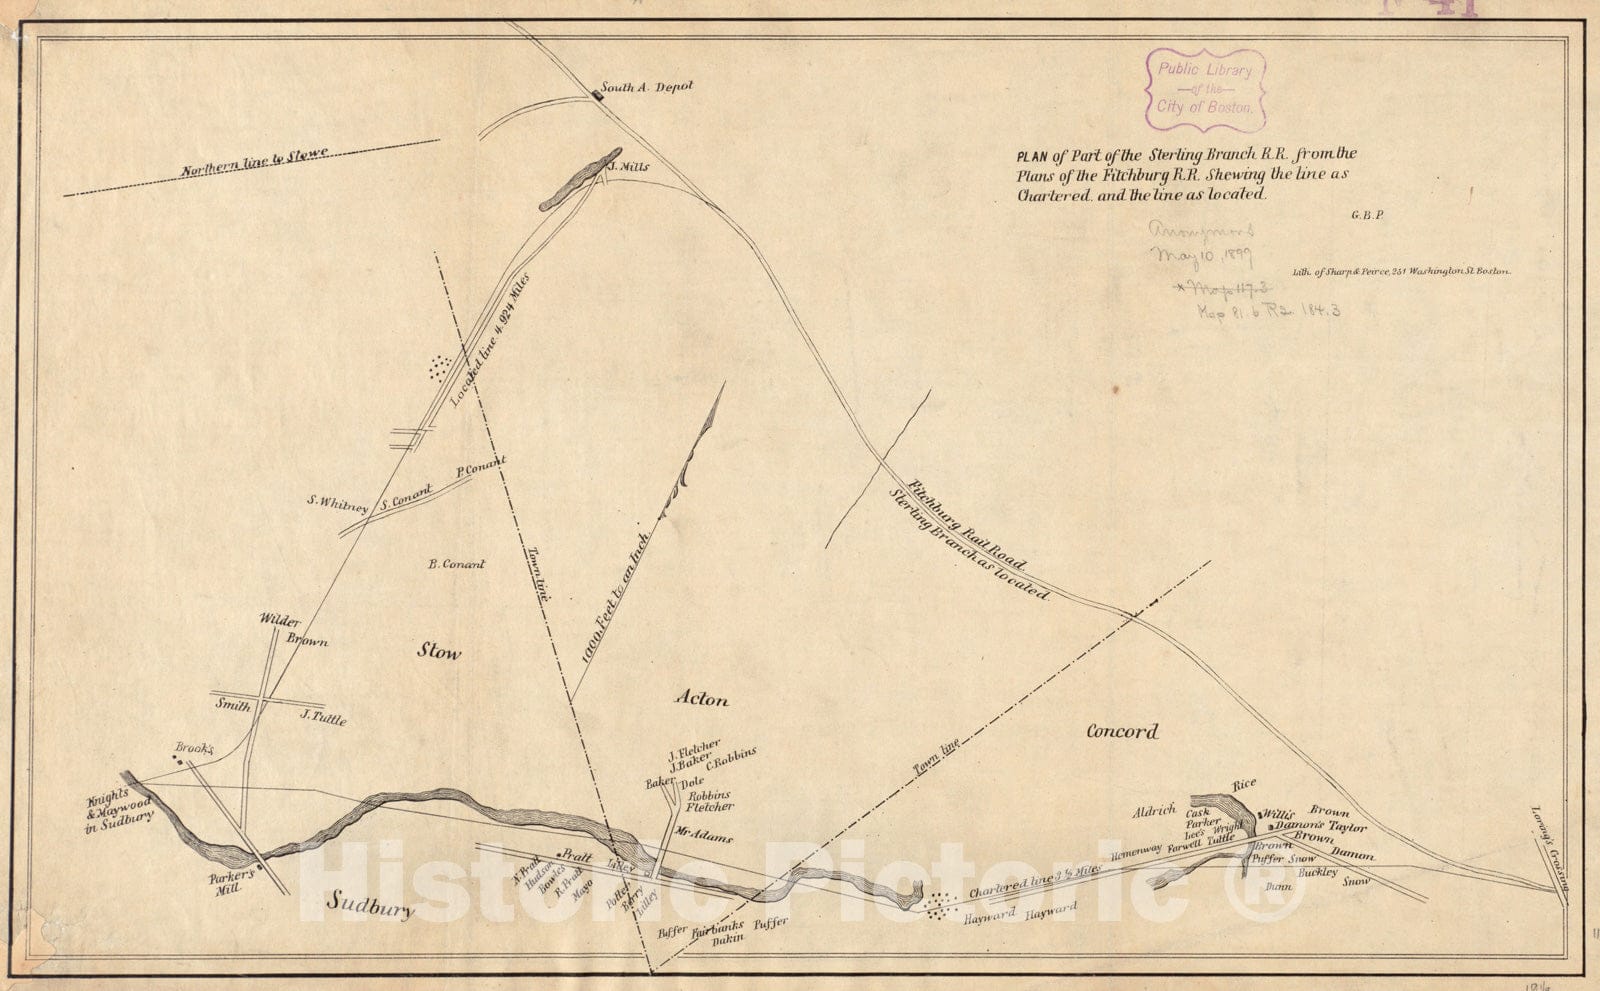 Historical Map, 1840-1849 Plan of pof the Sterling Branch R.R. from the Plans of the Fitchburg R.R. shewing the line as chartered and the line as located, Vintage Wall Art